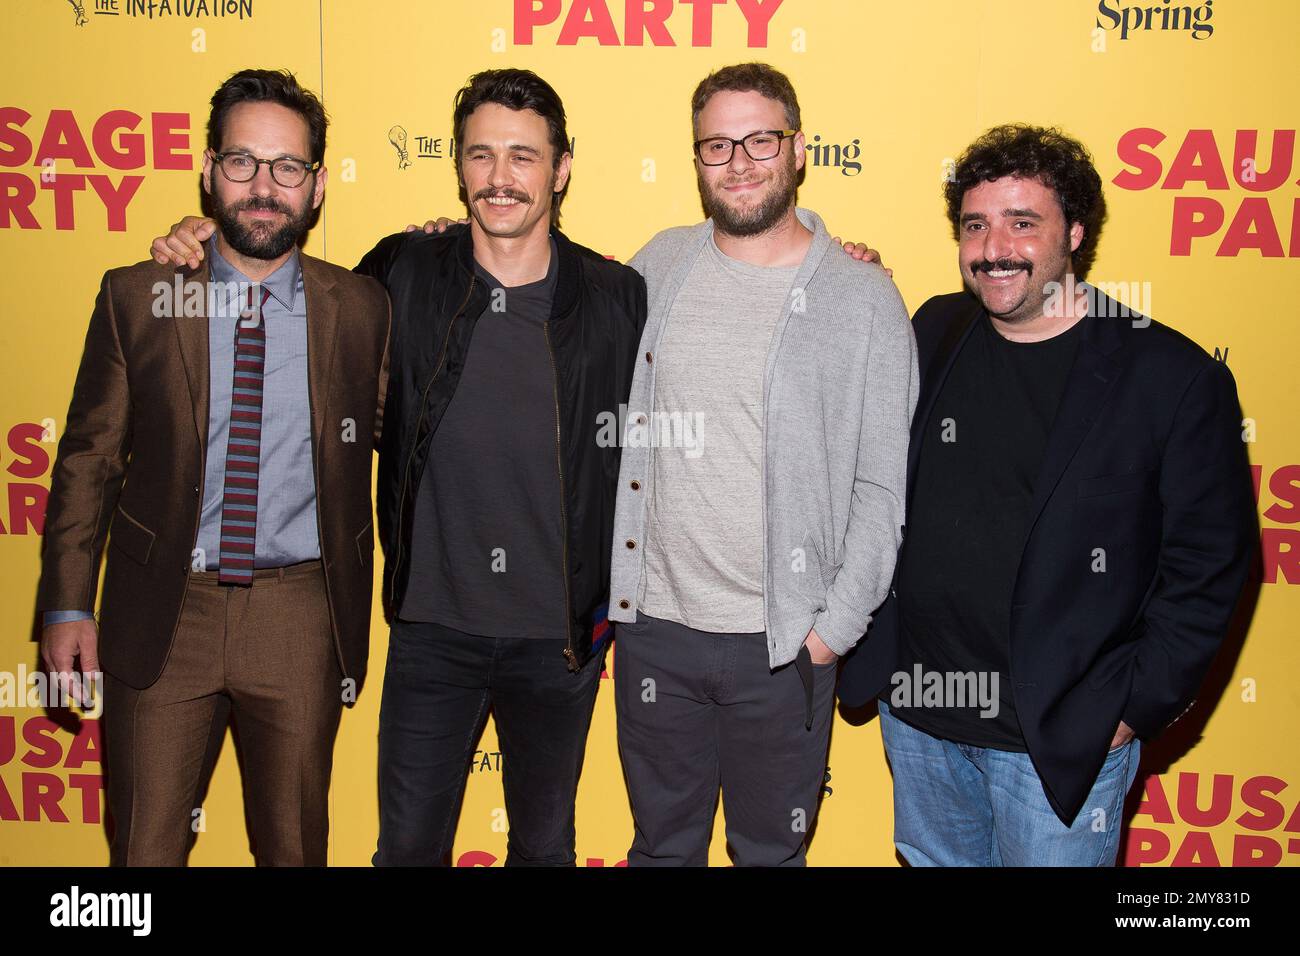 Paul Rudd, from left, James Franco, Seth Rogen and David Krumholtz attend a  screening of the animated film "Sausage Party" during a screening at the  Sunshine Landmark on Thursday, Aug. 4, 2016,